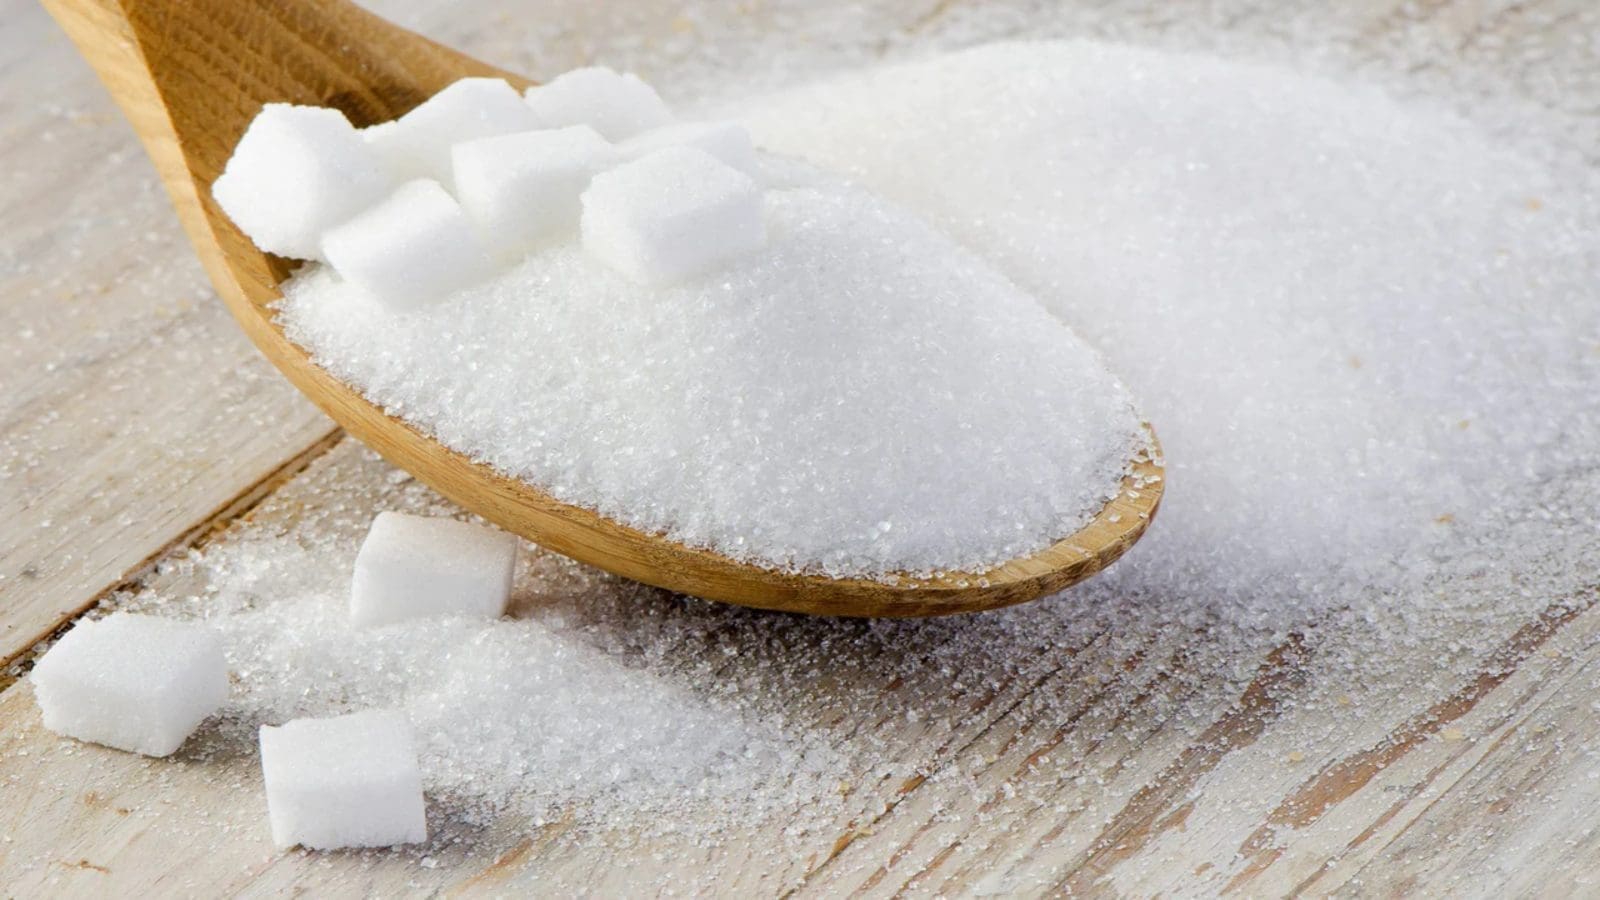 Nine Kenyan firms granted licenses to import 50,500 tonnes of industrial sugar